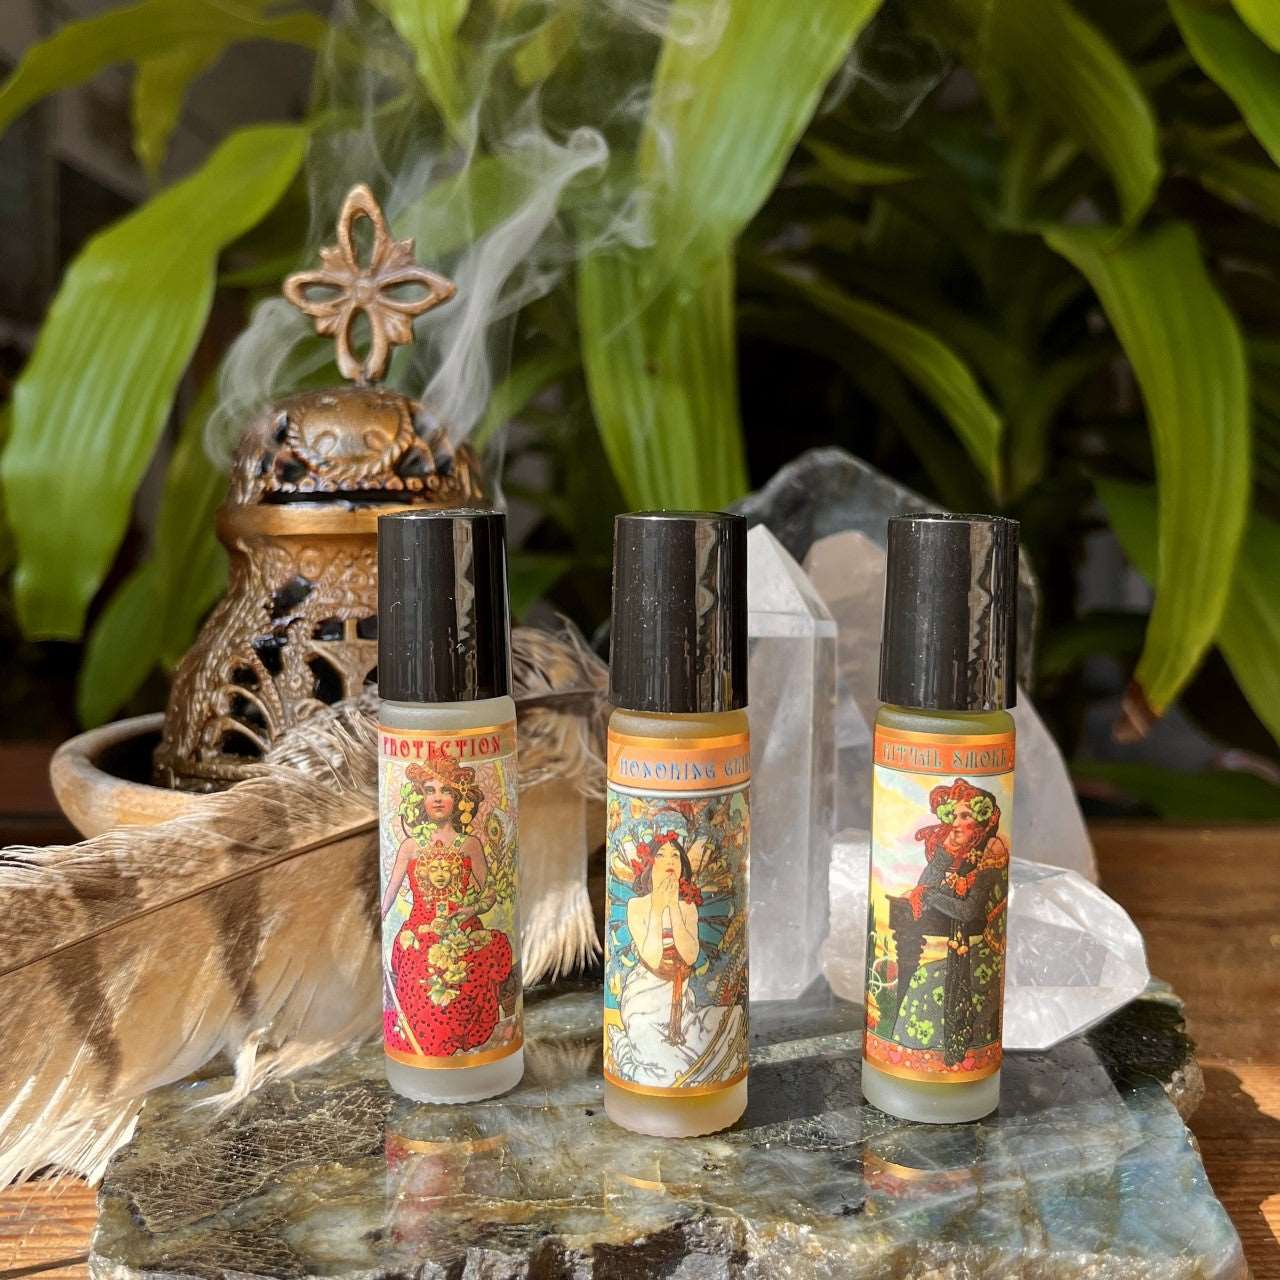 1 oz Honoring Grief Natural Roll-On Perfume with Comforting Scents of Orange, Cedar, and Patchouli Infused in Organic MCT Oil for Emotional Support and Healing